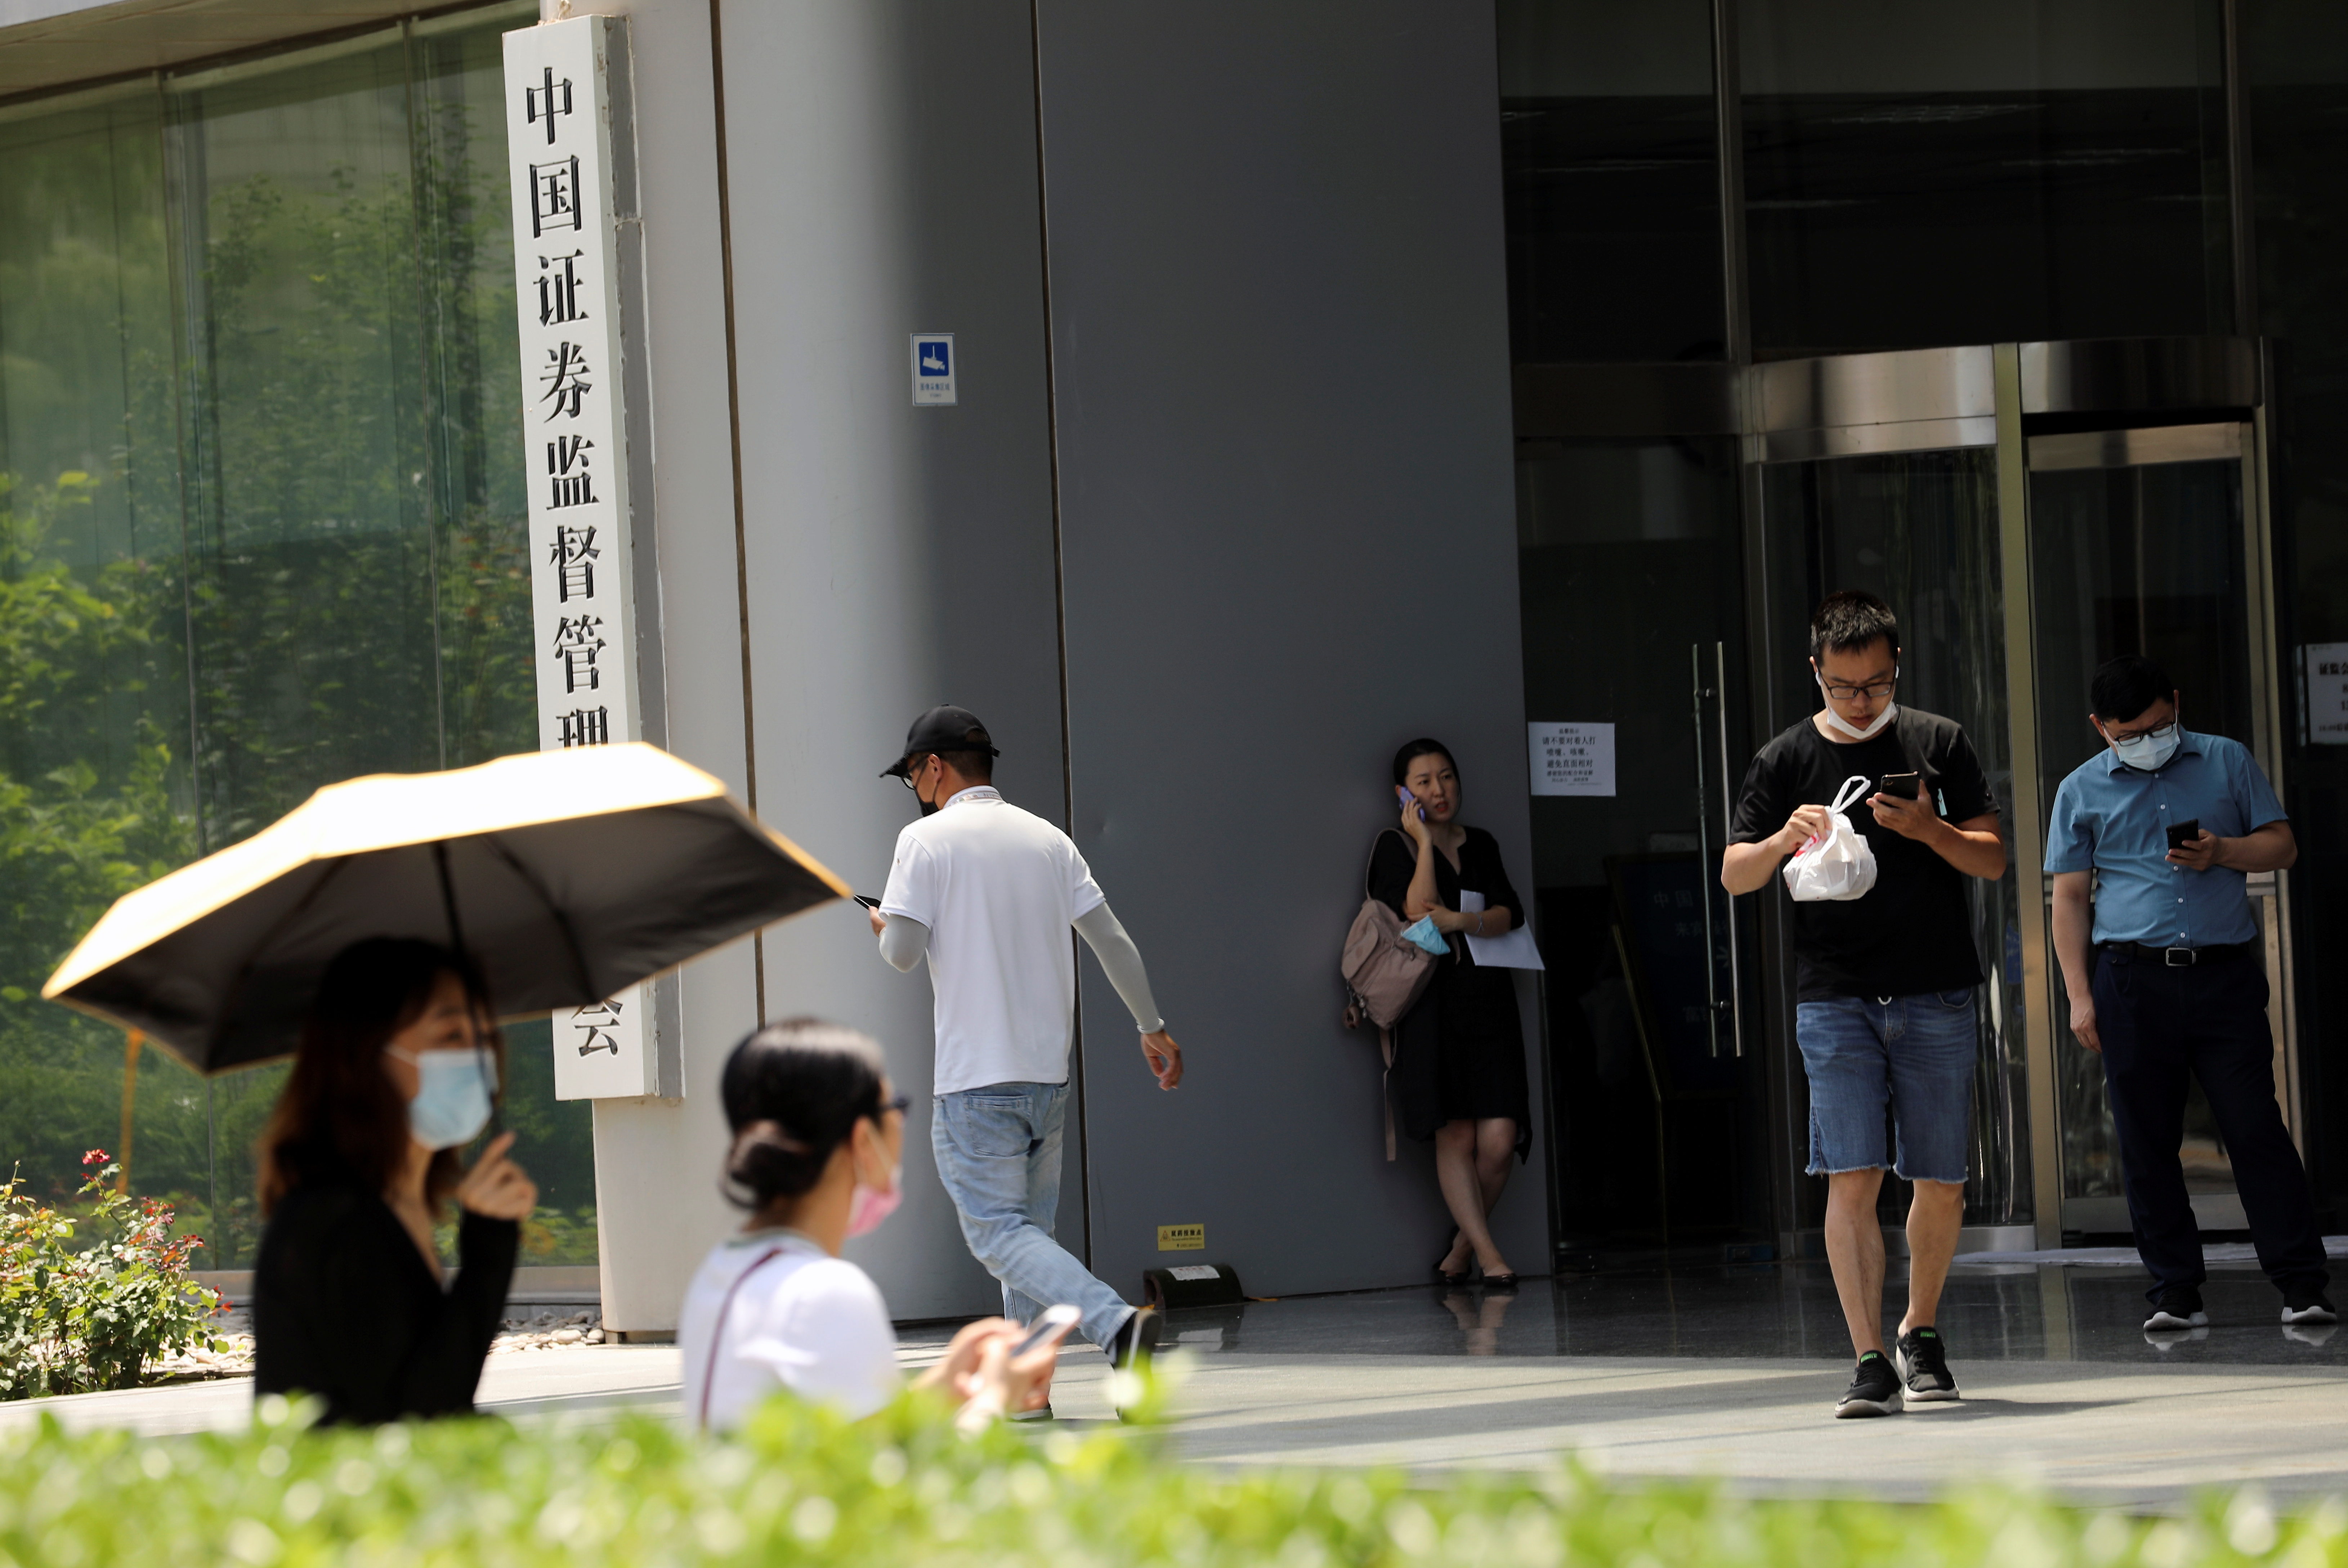 People walk past the China Securities Regulatory Commission (CSRC) sign at its building on the Financial Street in Beijing, China July 9, 2021. REUTERS/Tingshu Wang